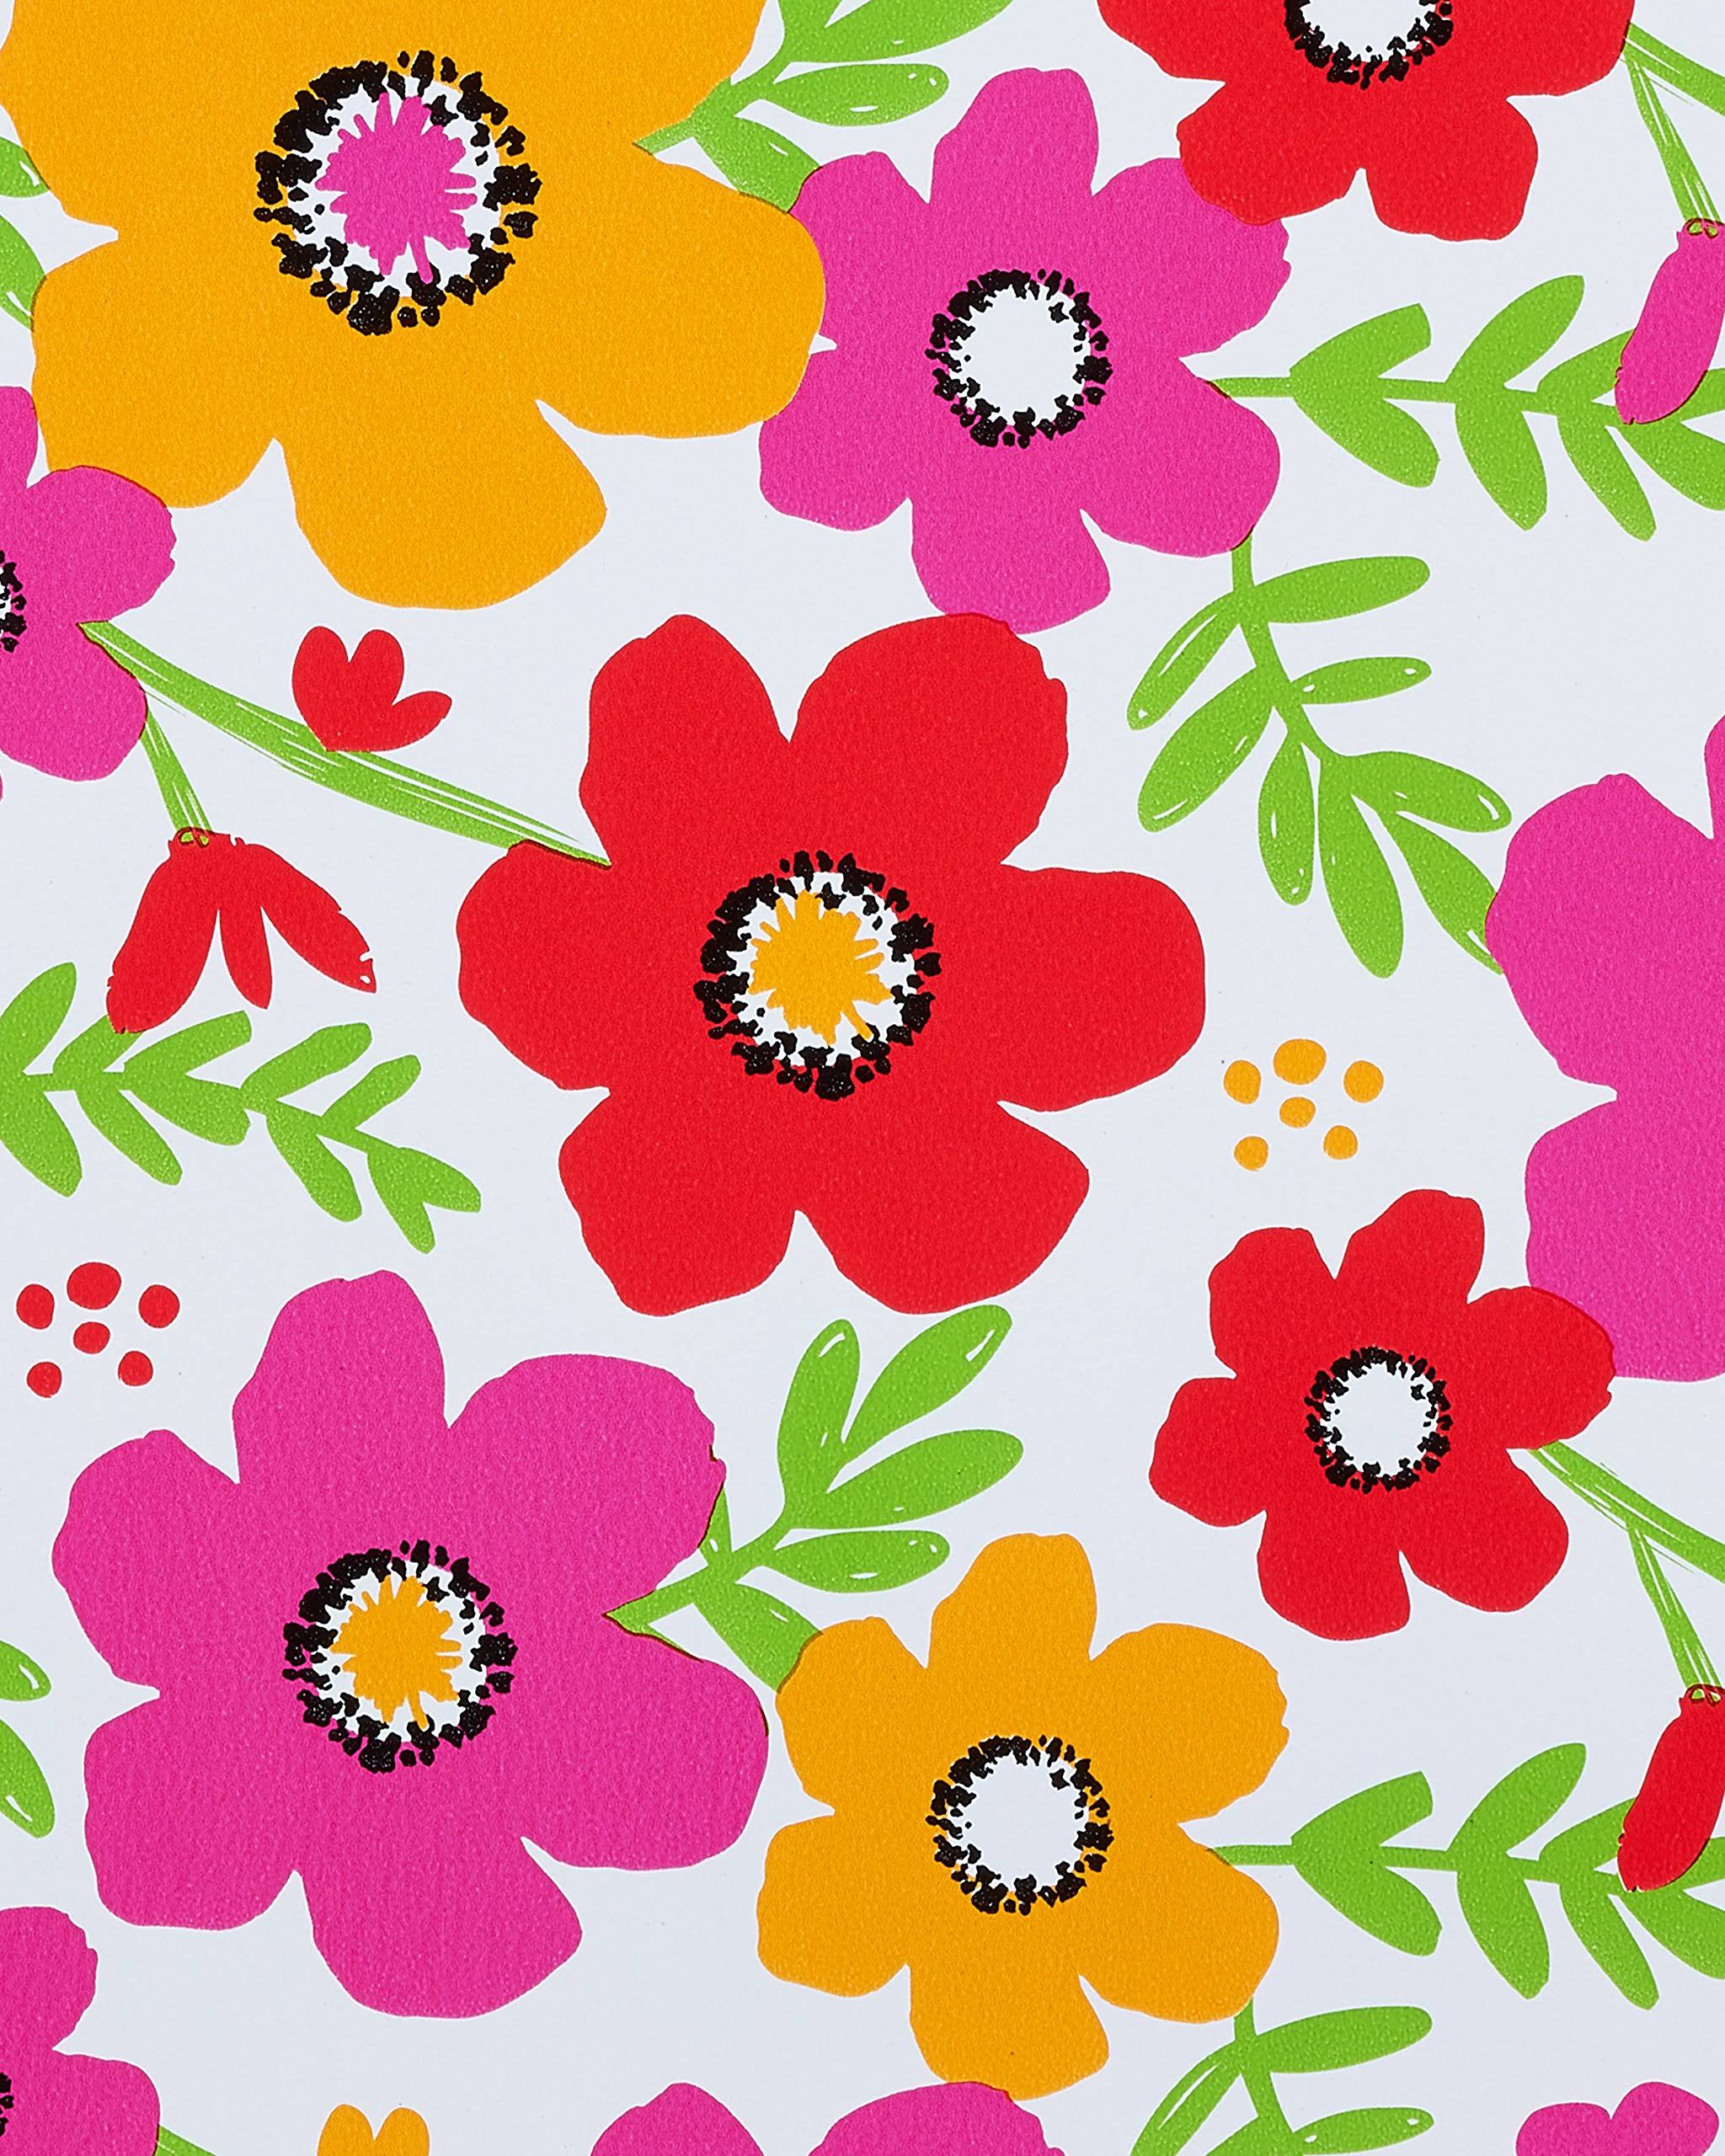 American Greetings Wrapping Paper, Fun Floral Pattern, 2.5' x 3'